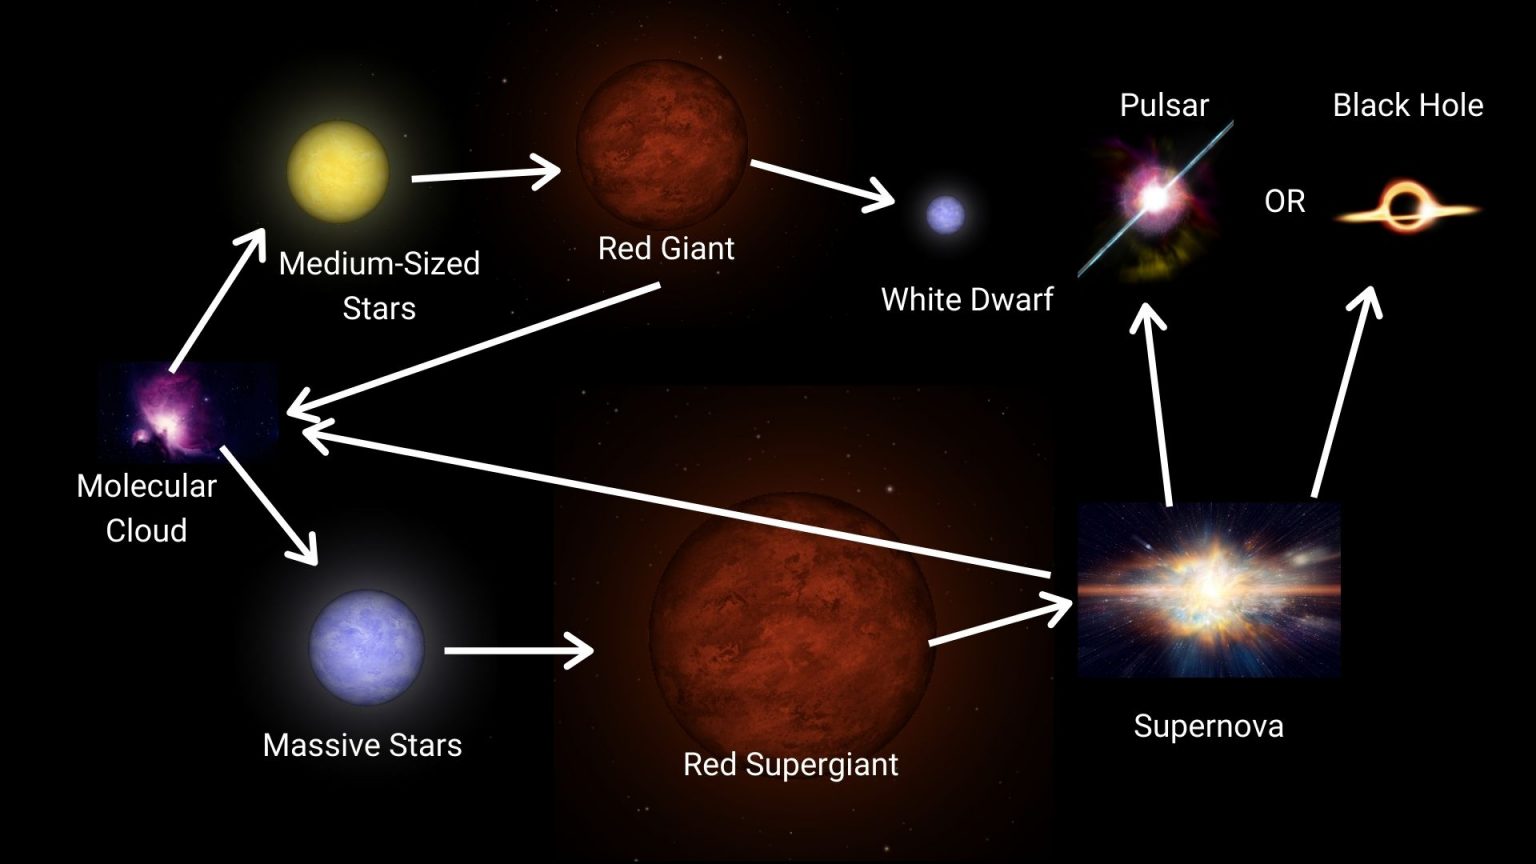 Life Cycle Of A Star Drawing